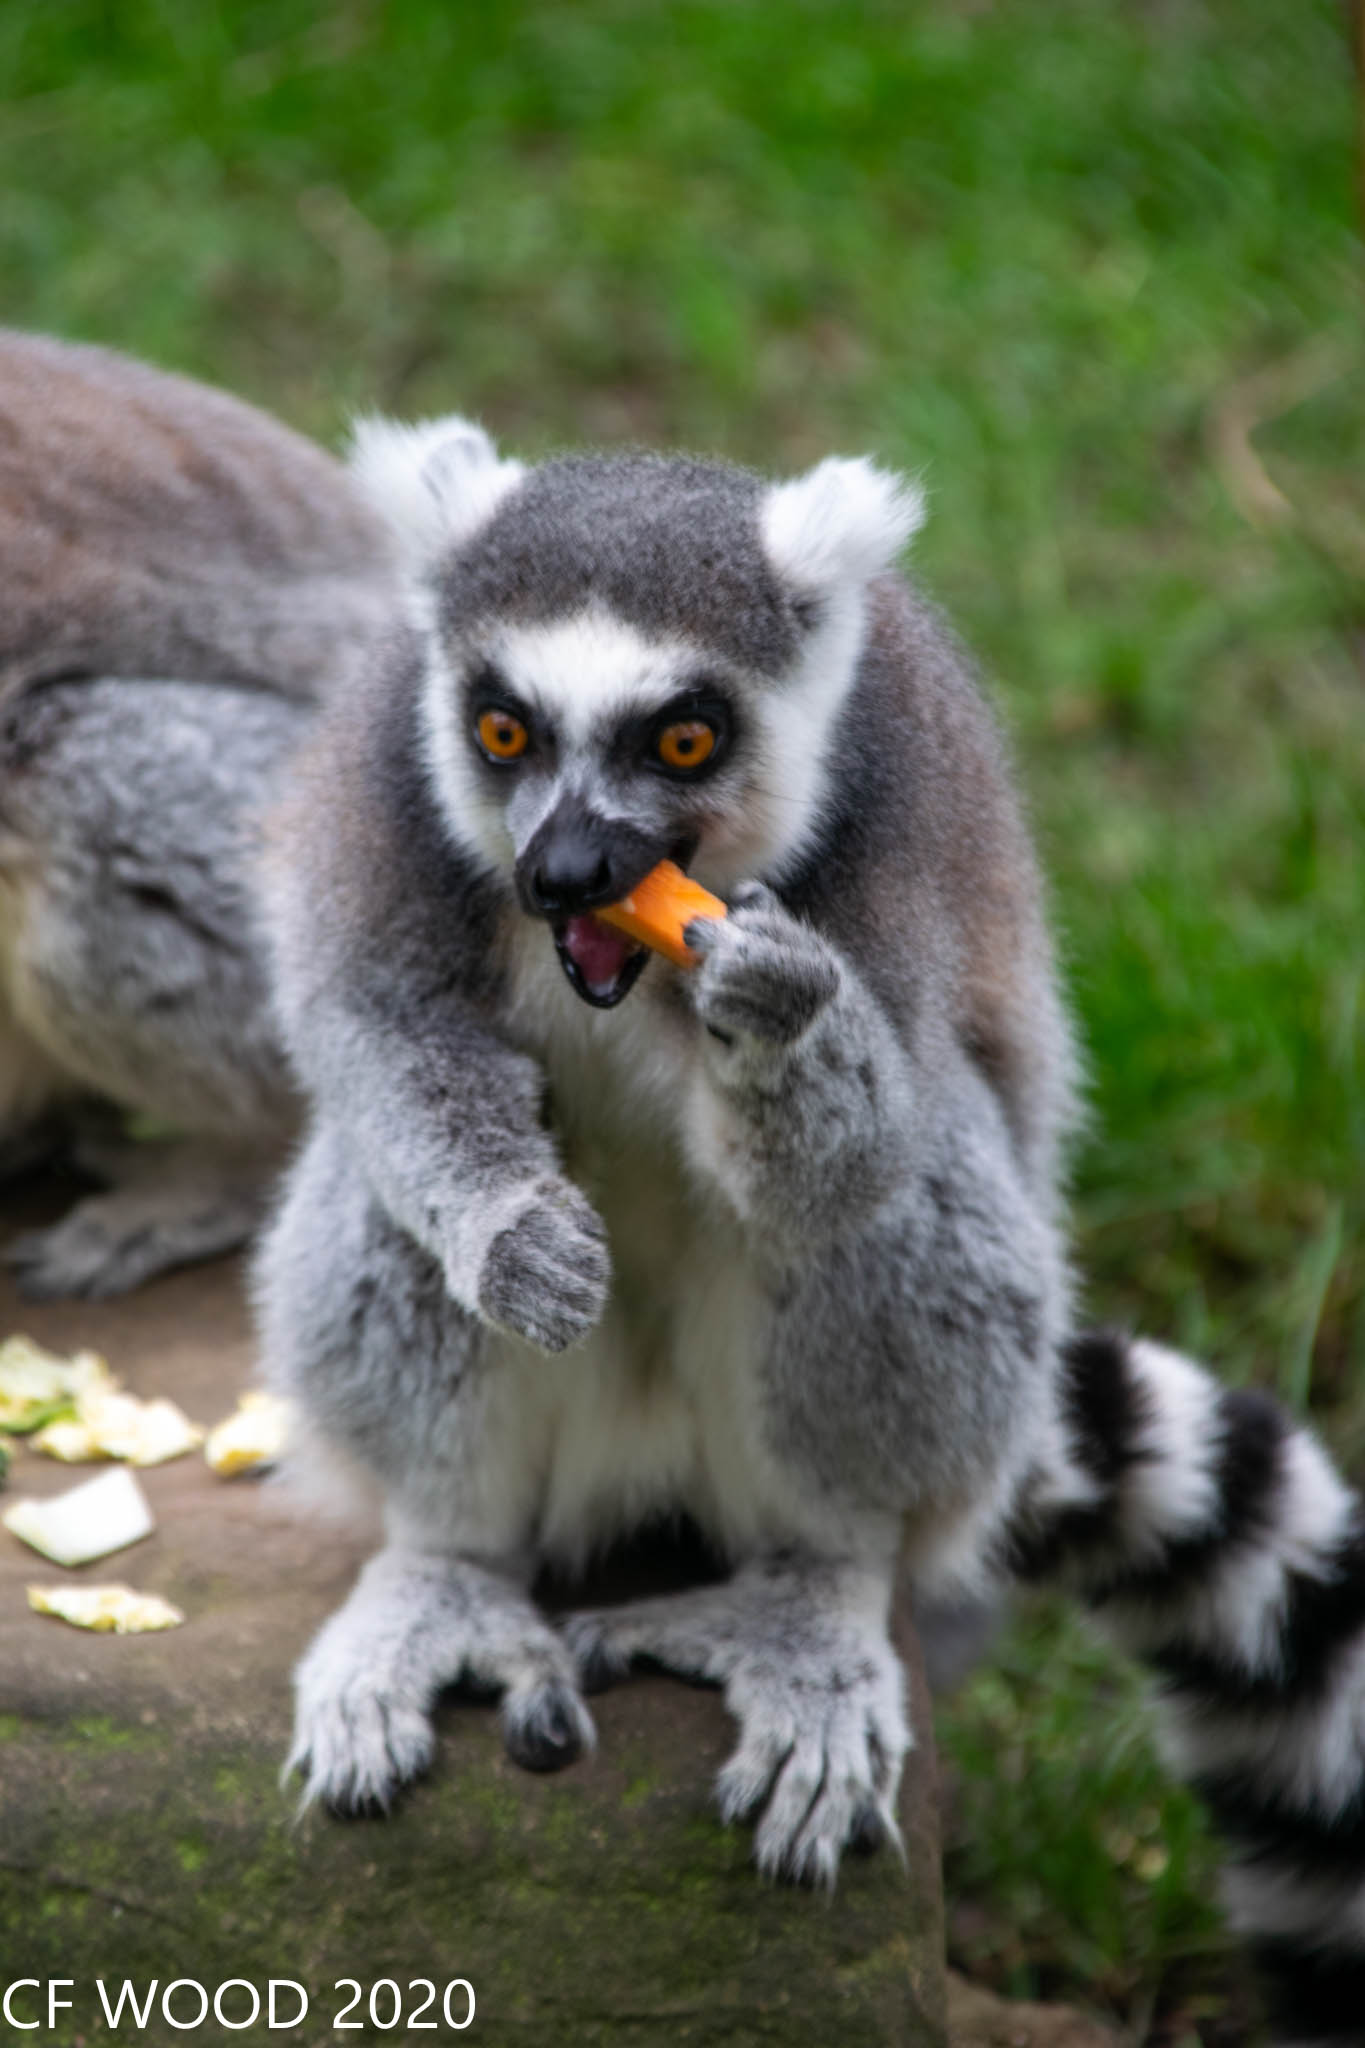 small monkey eating carrot